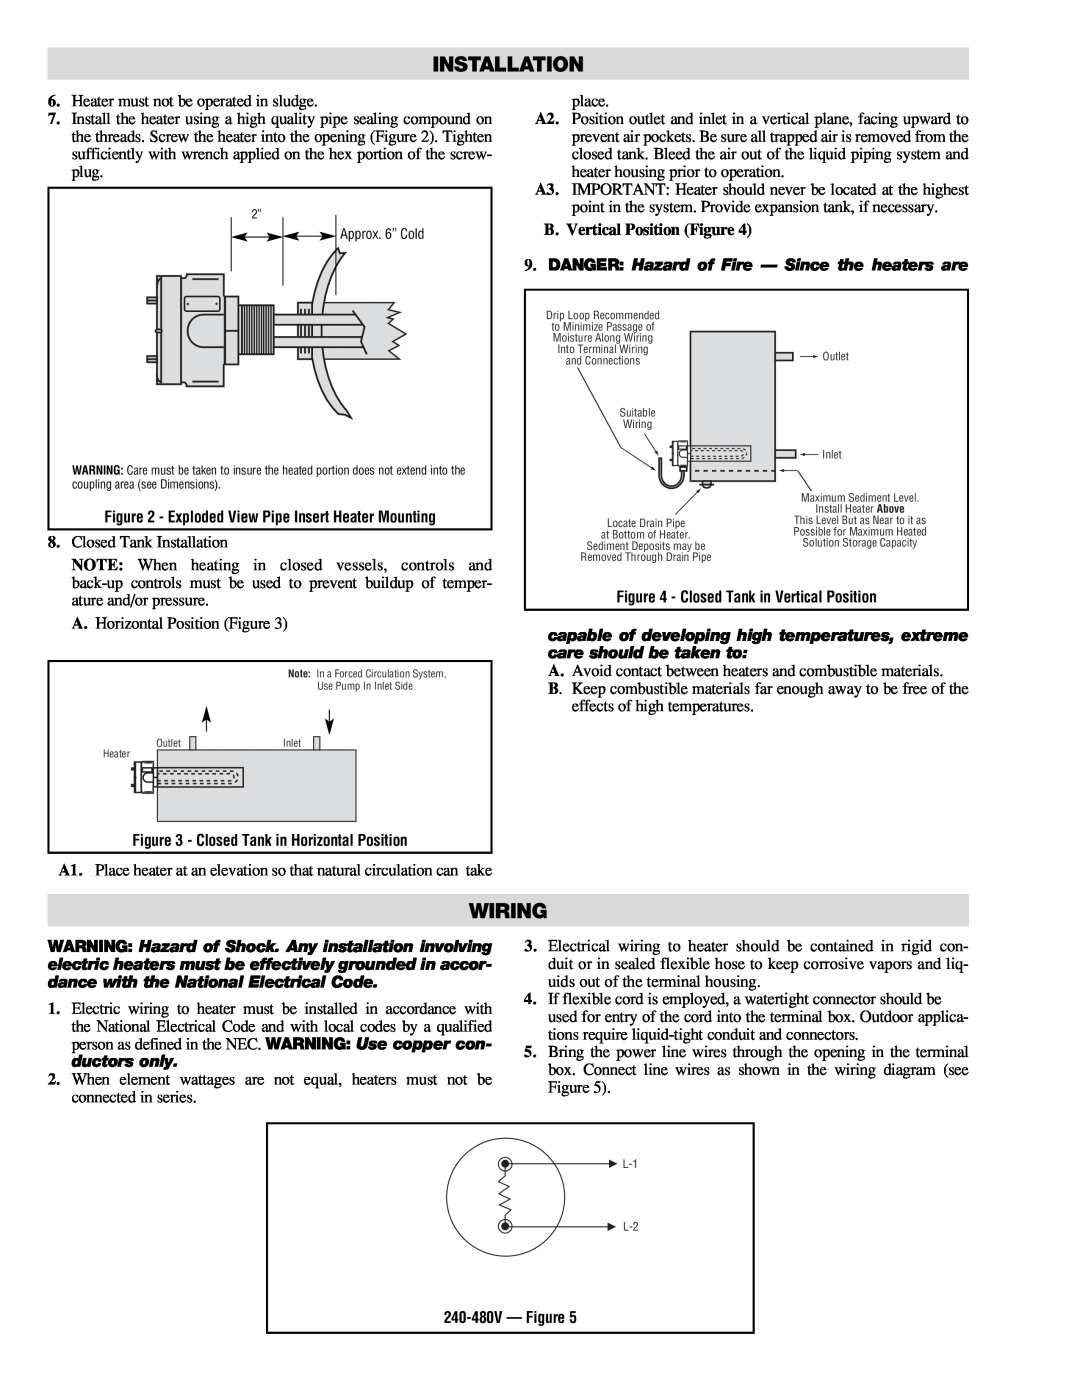 Chromalox PD441-1 manual Wiring, B.Vertical Position Figure, NOTE When, Installation 